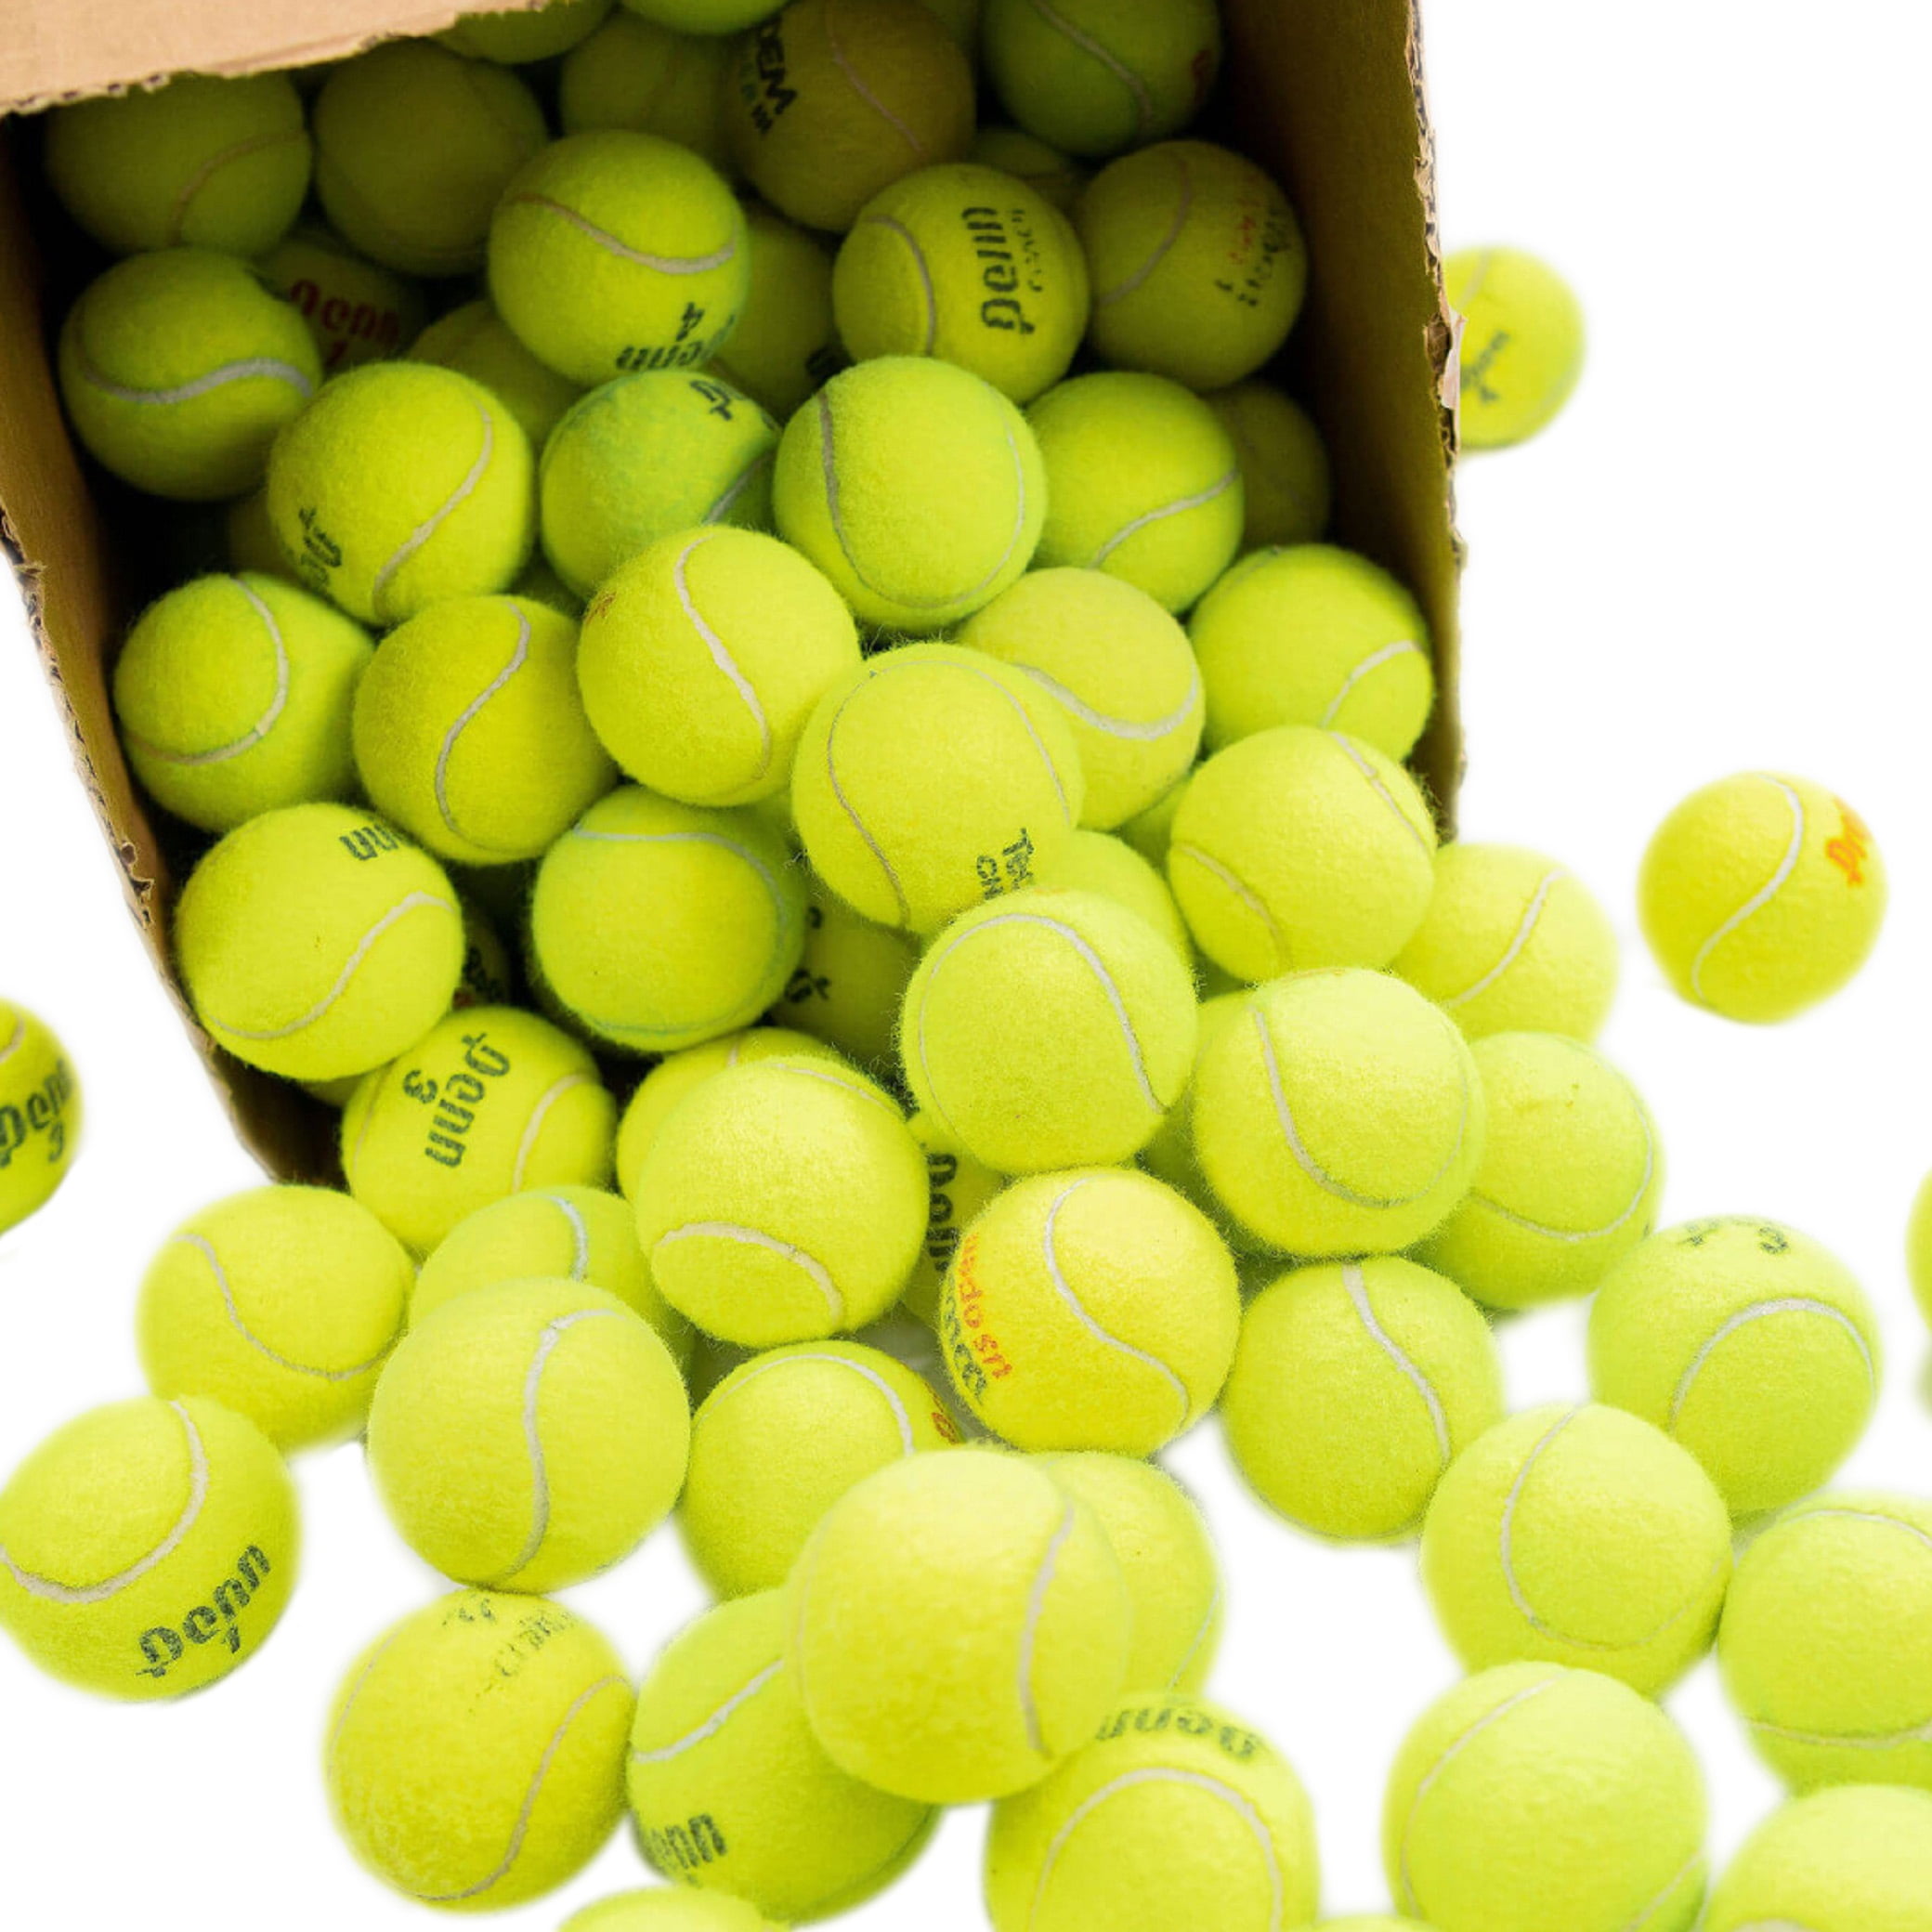 100 Used Tennis Balls - LOW COST DOG BALLS - FREE SHIPPING - SAVE 10%